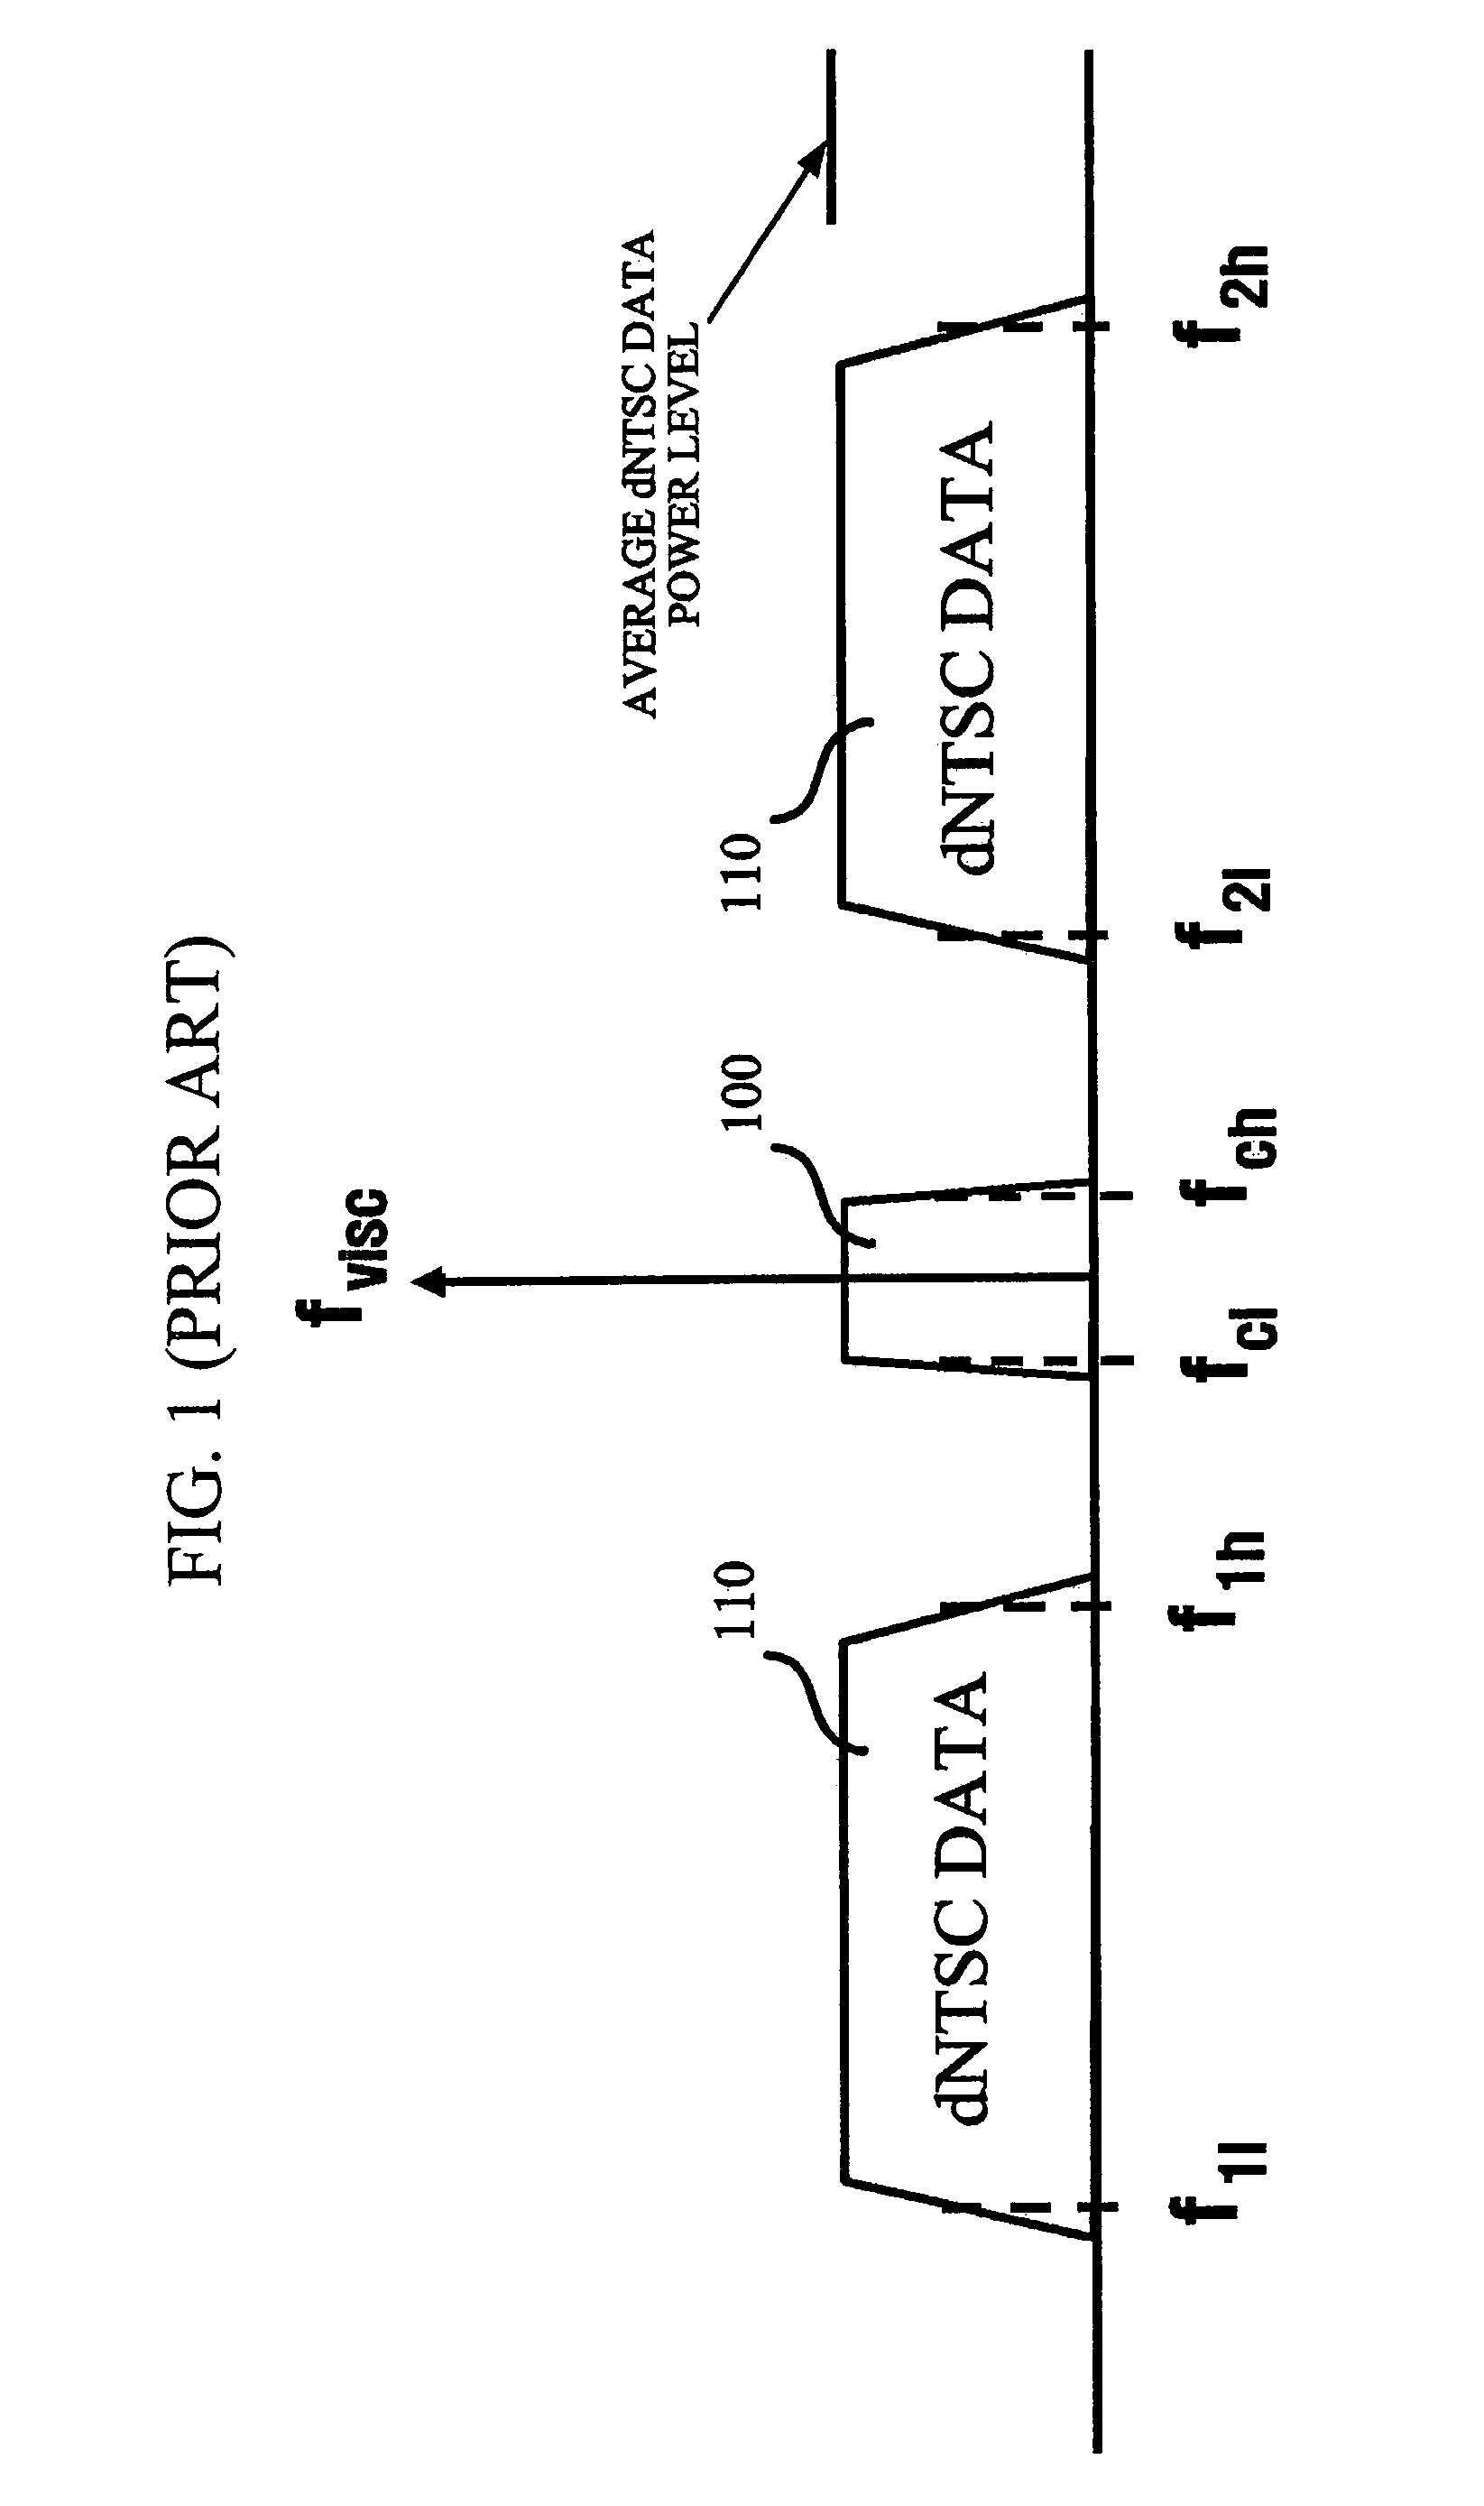 Antenna system for terrestrial broadcasting